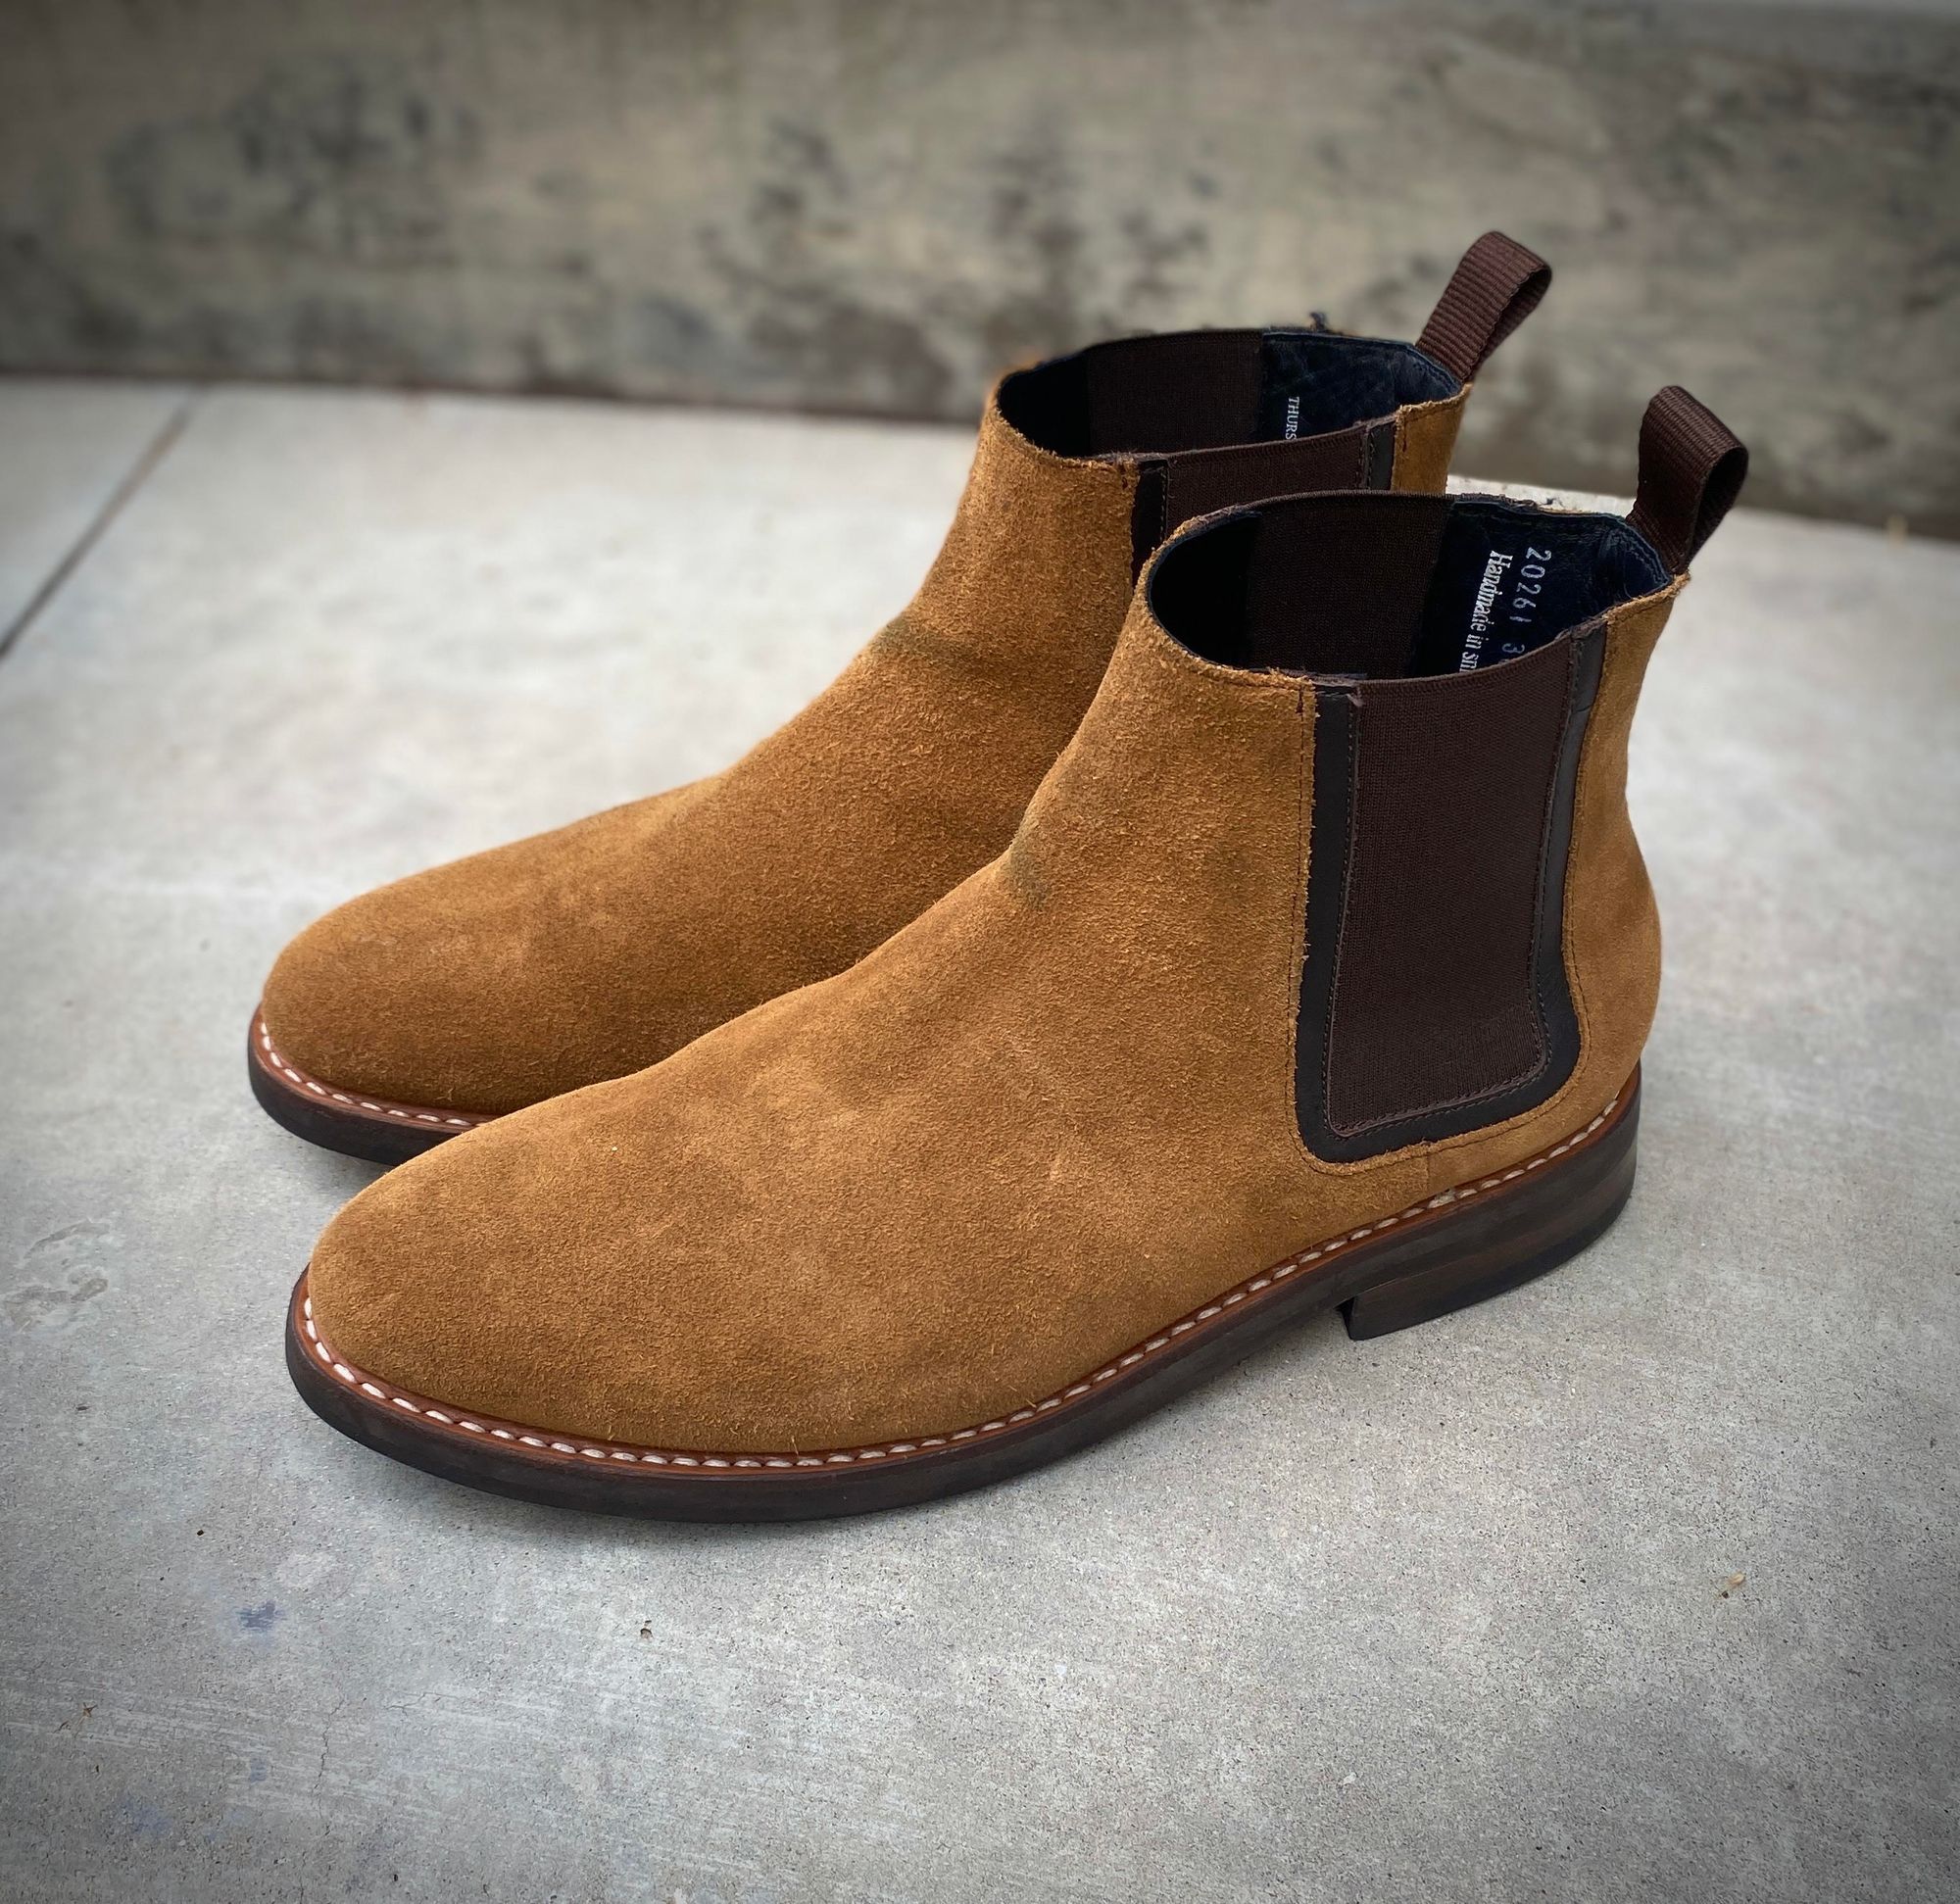 Thursday Boot Company Review: Best-In-Class